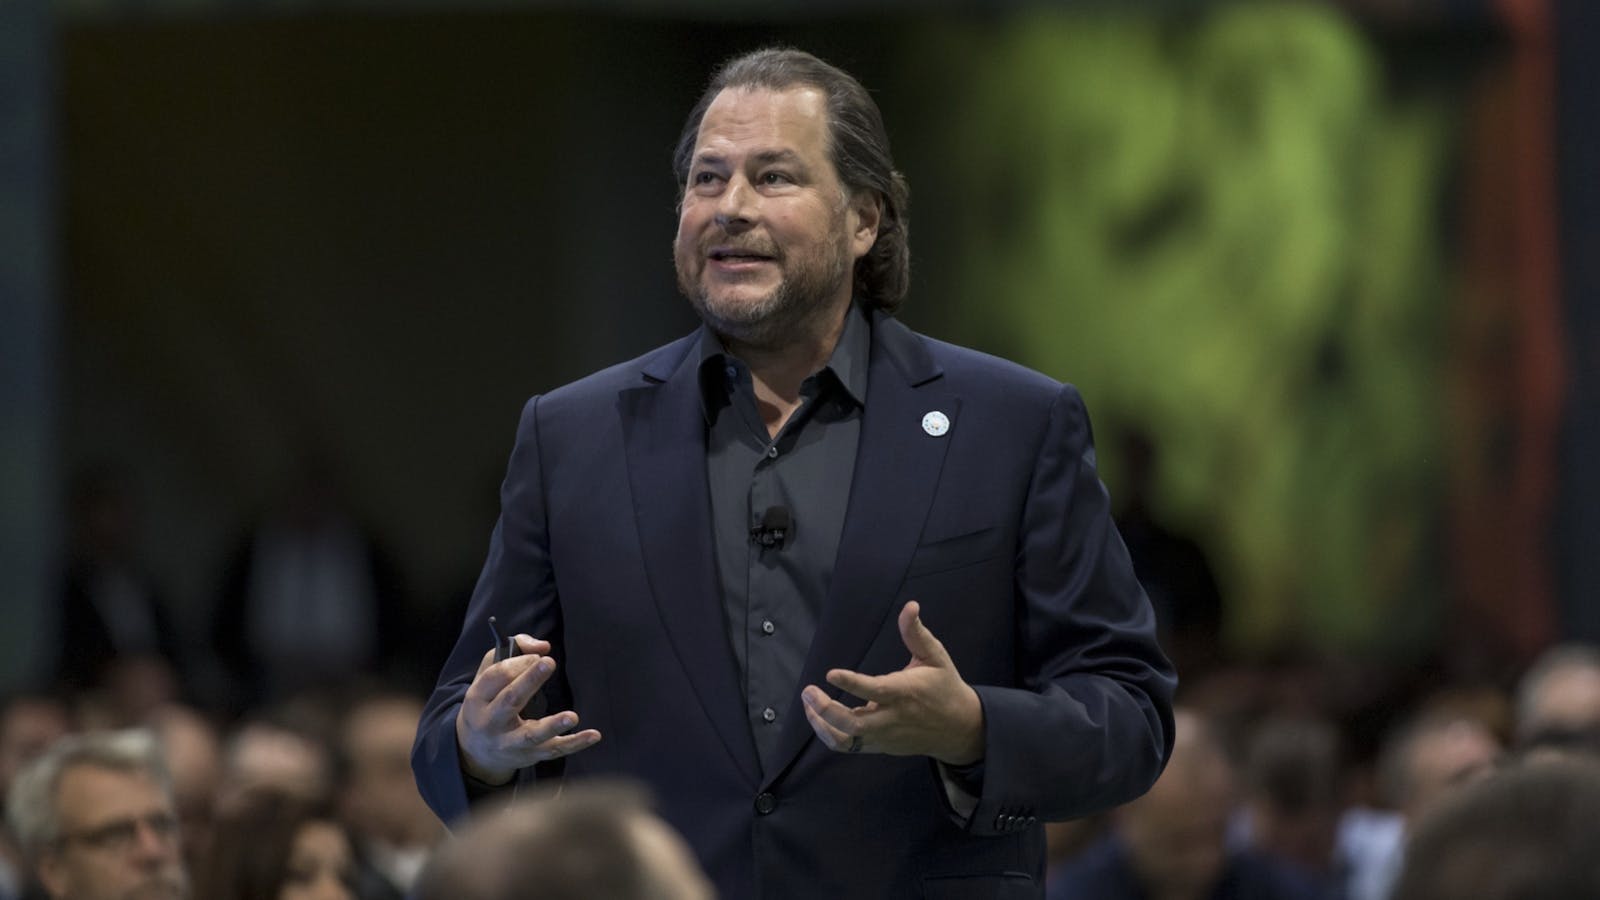 Salesforce co-CEO Marc Benioff. Photo by Bloomberg